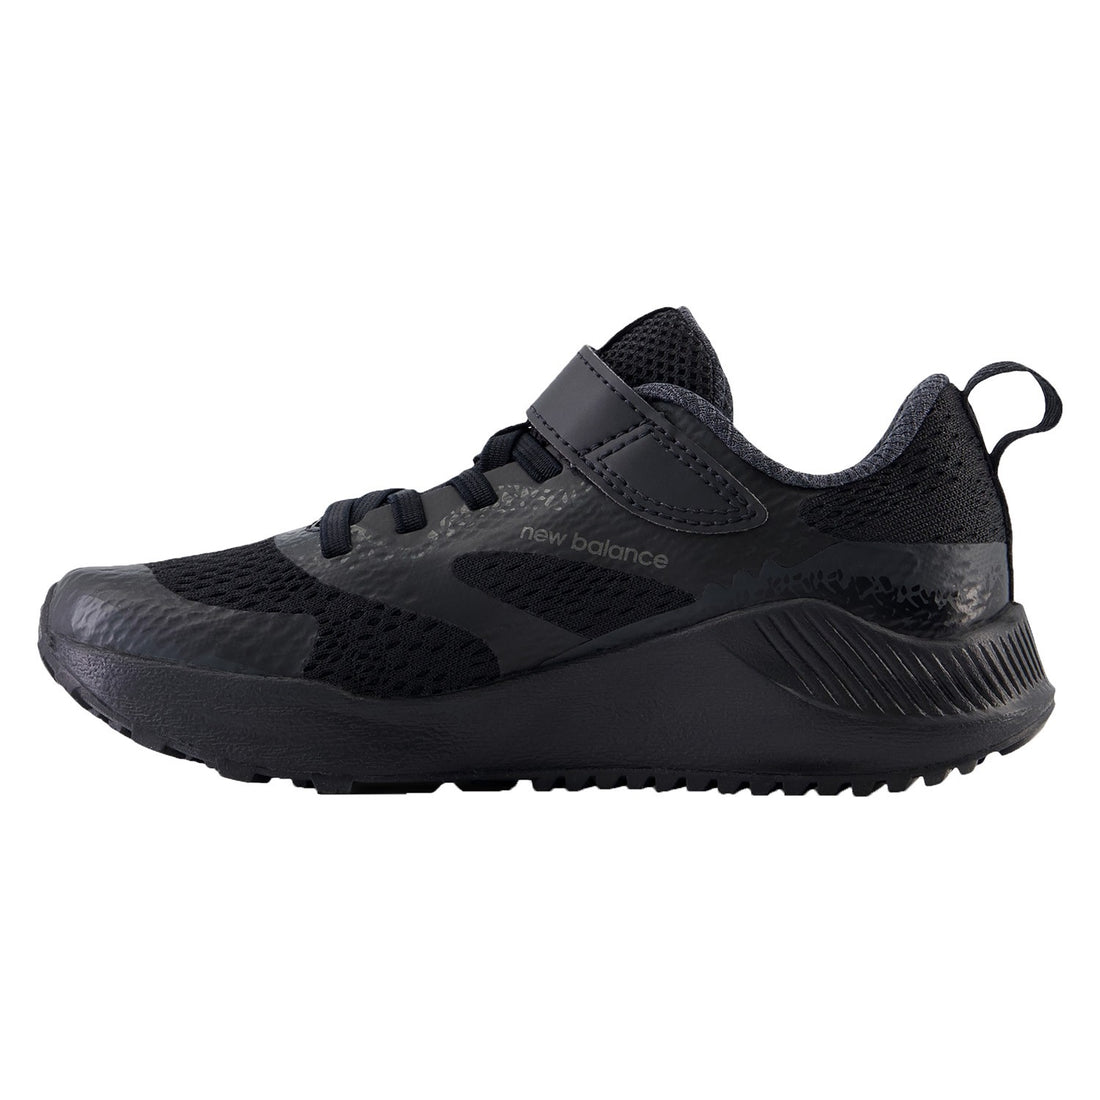 New Balance Kid's DynaSoft Nitrel v5 Bungee Lace with Top Strap Shoe Black